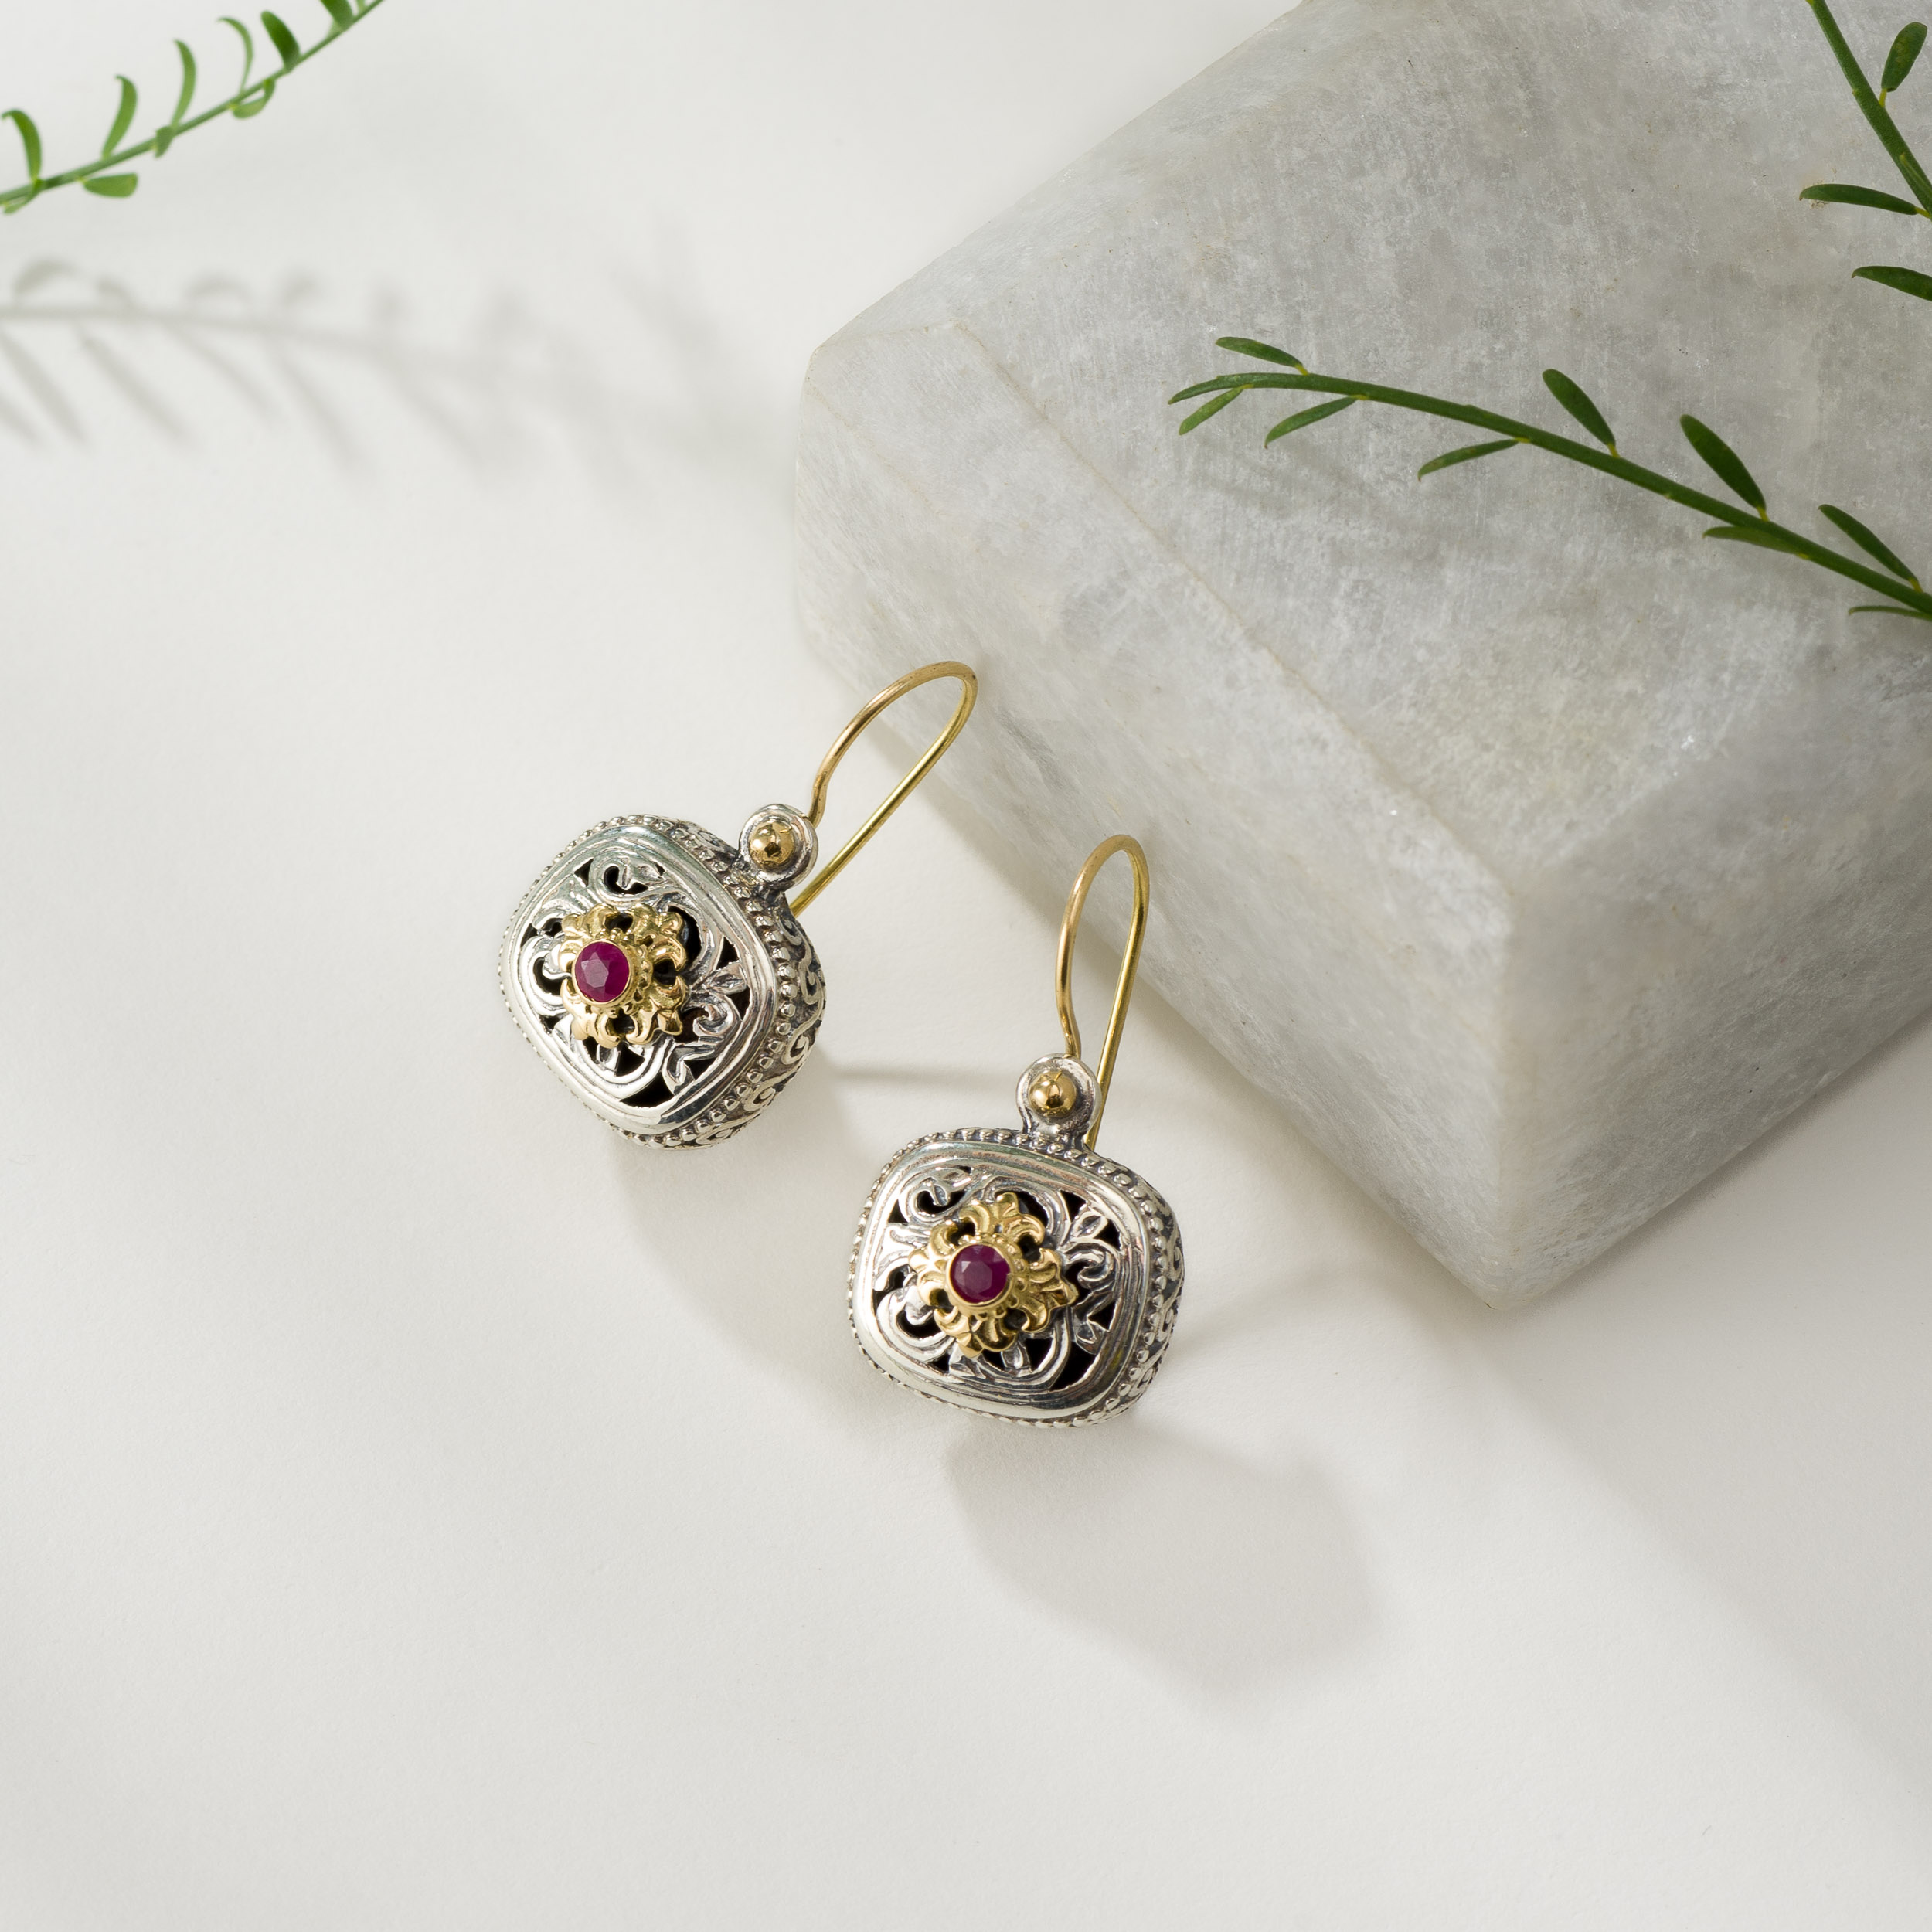 Garden Shadows Cushion Earrings in 18K Gold and Sterling Silver with Ruby